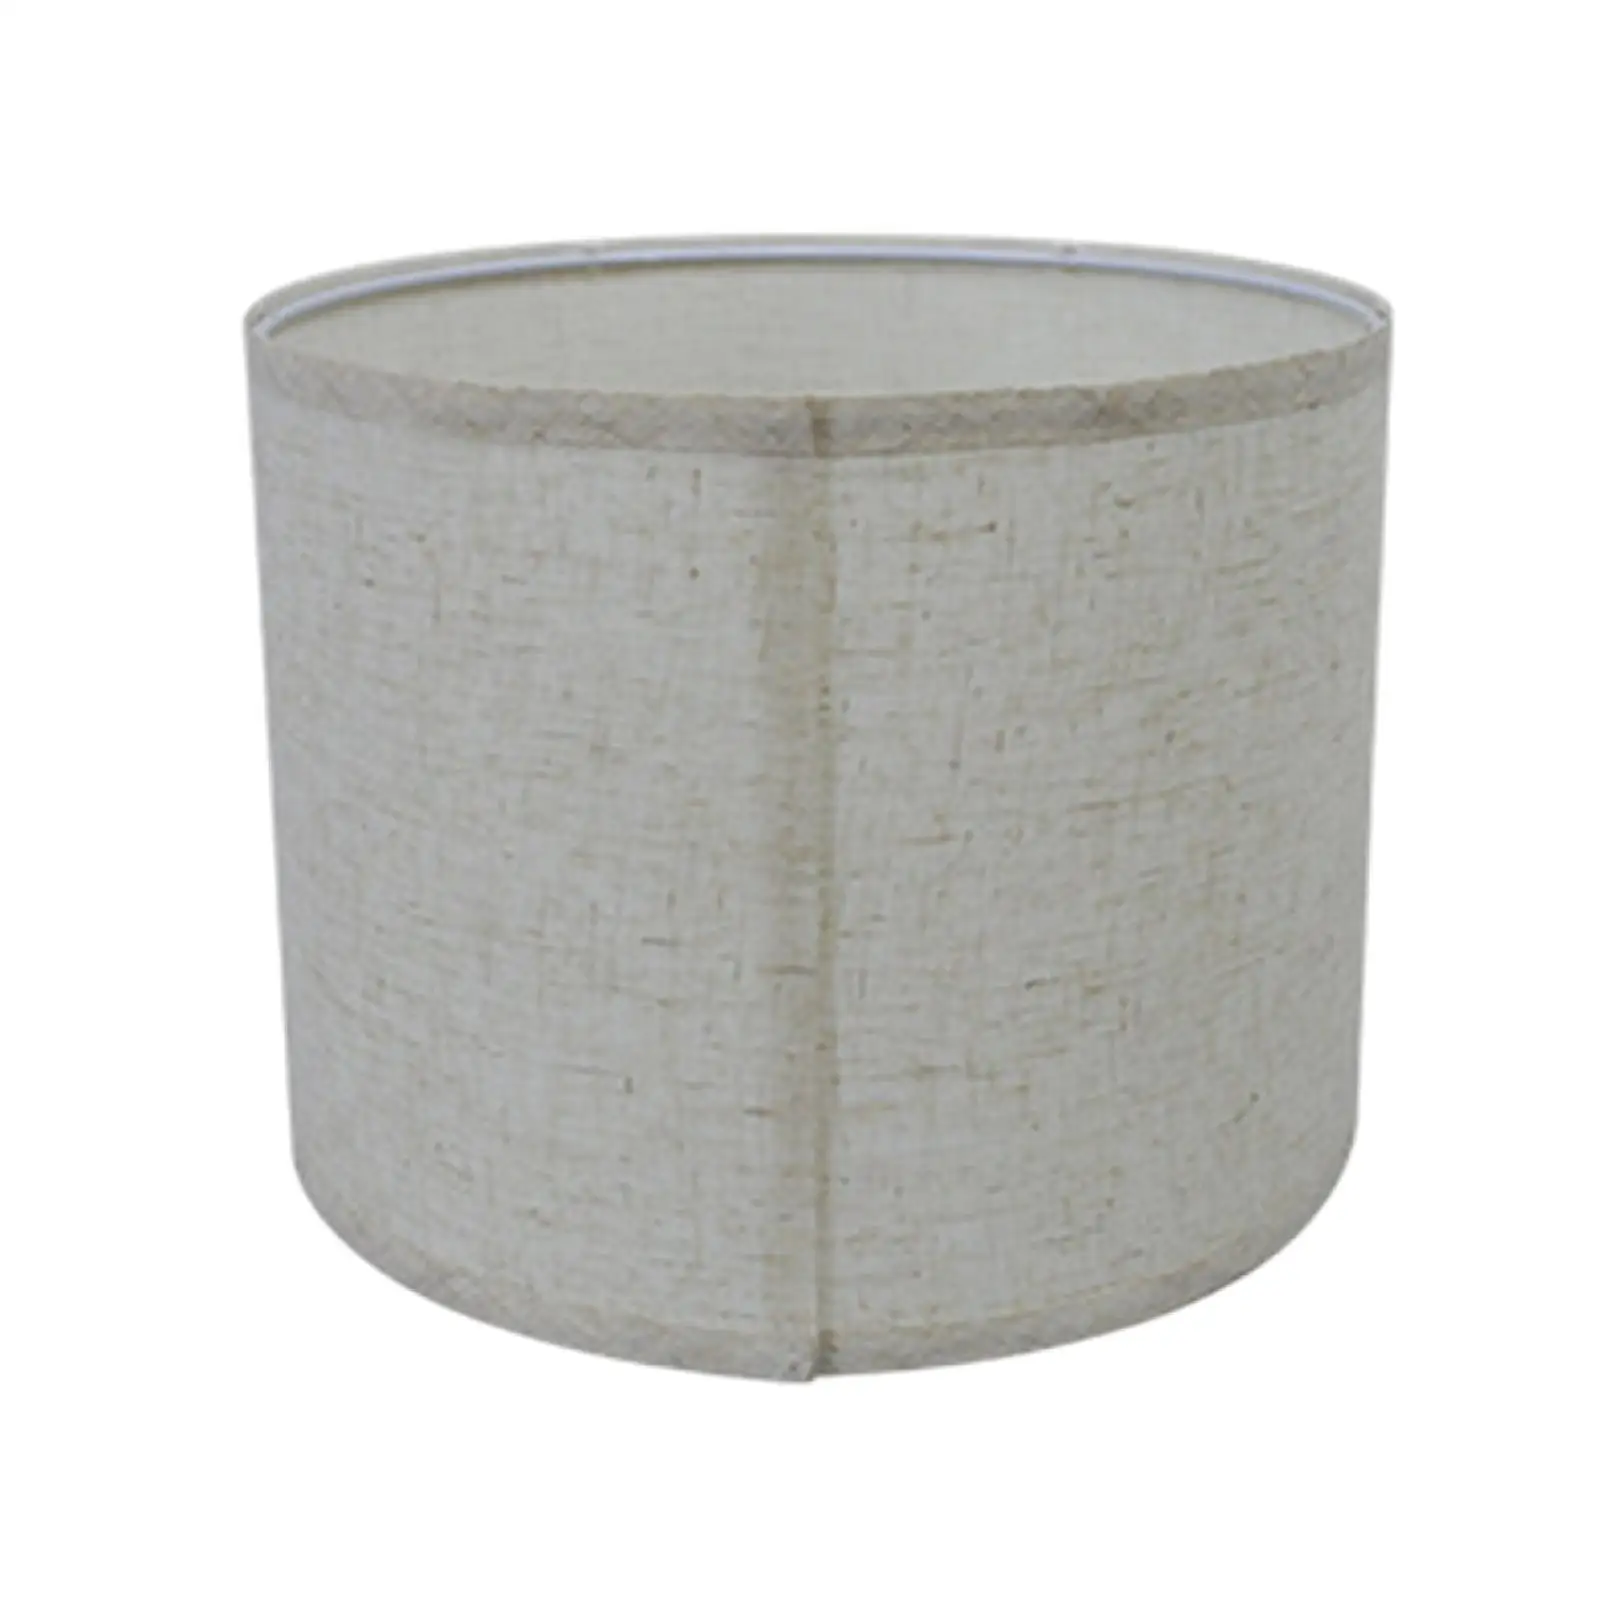 Drum Lamp Shade Cylinder Hand Crafted Natural Linen Modern Classic Cloth Durable Barrel Lampshade for Floor Light Table Lamp